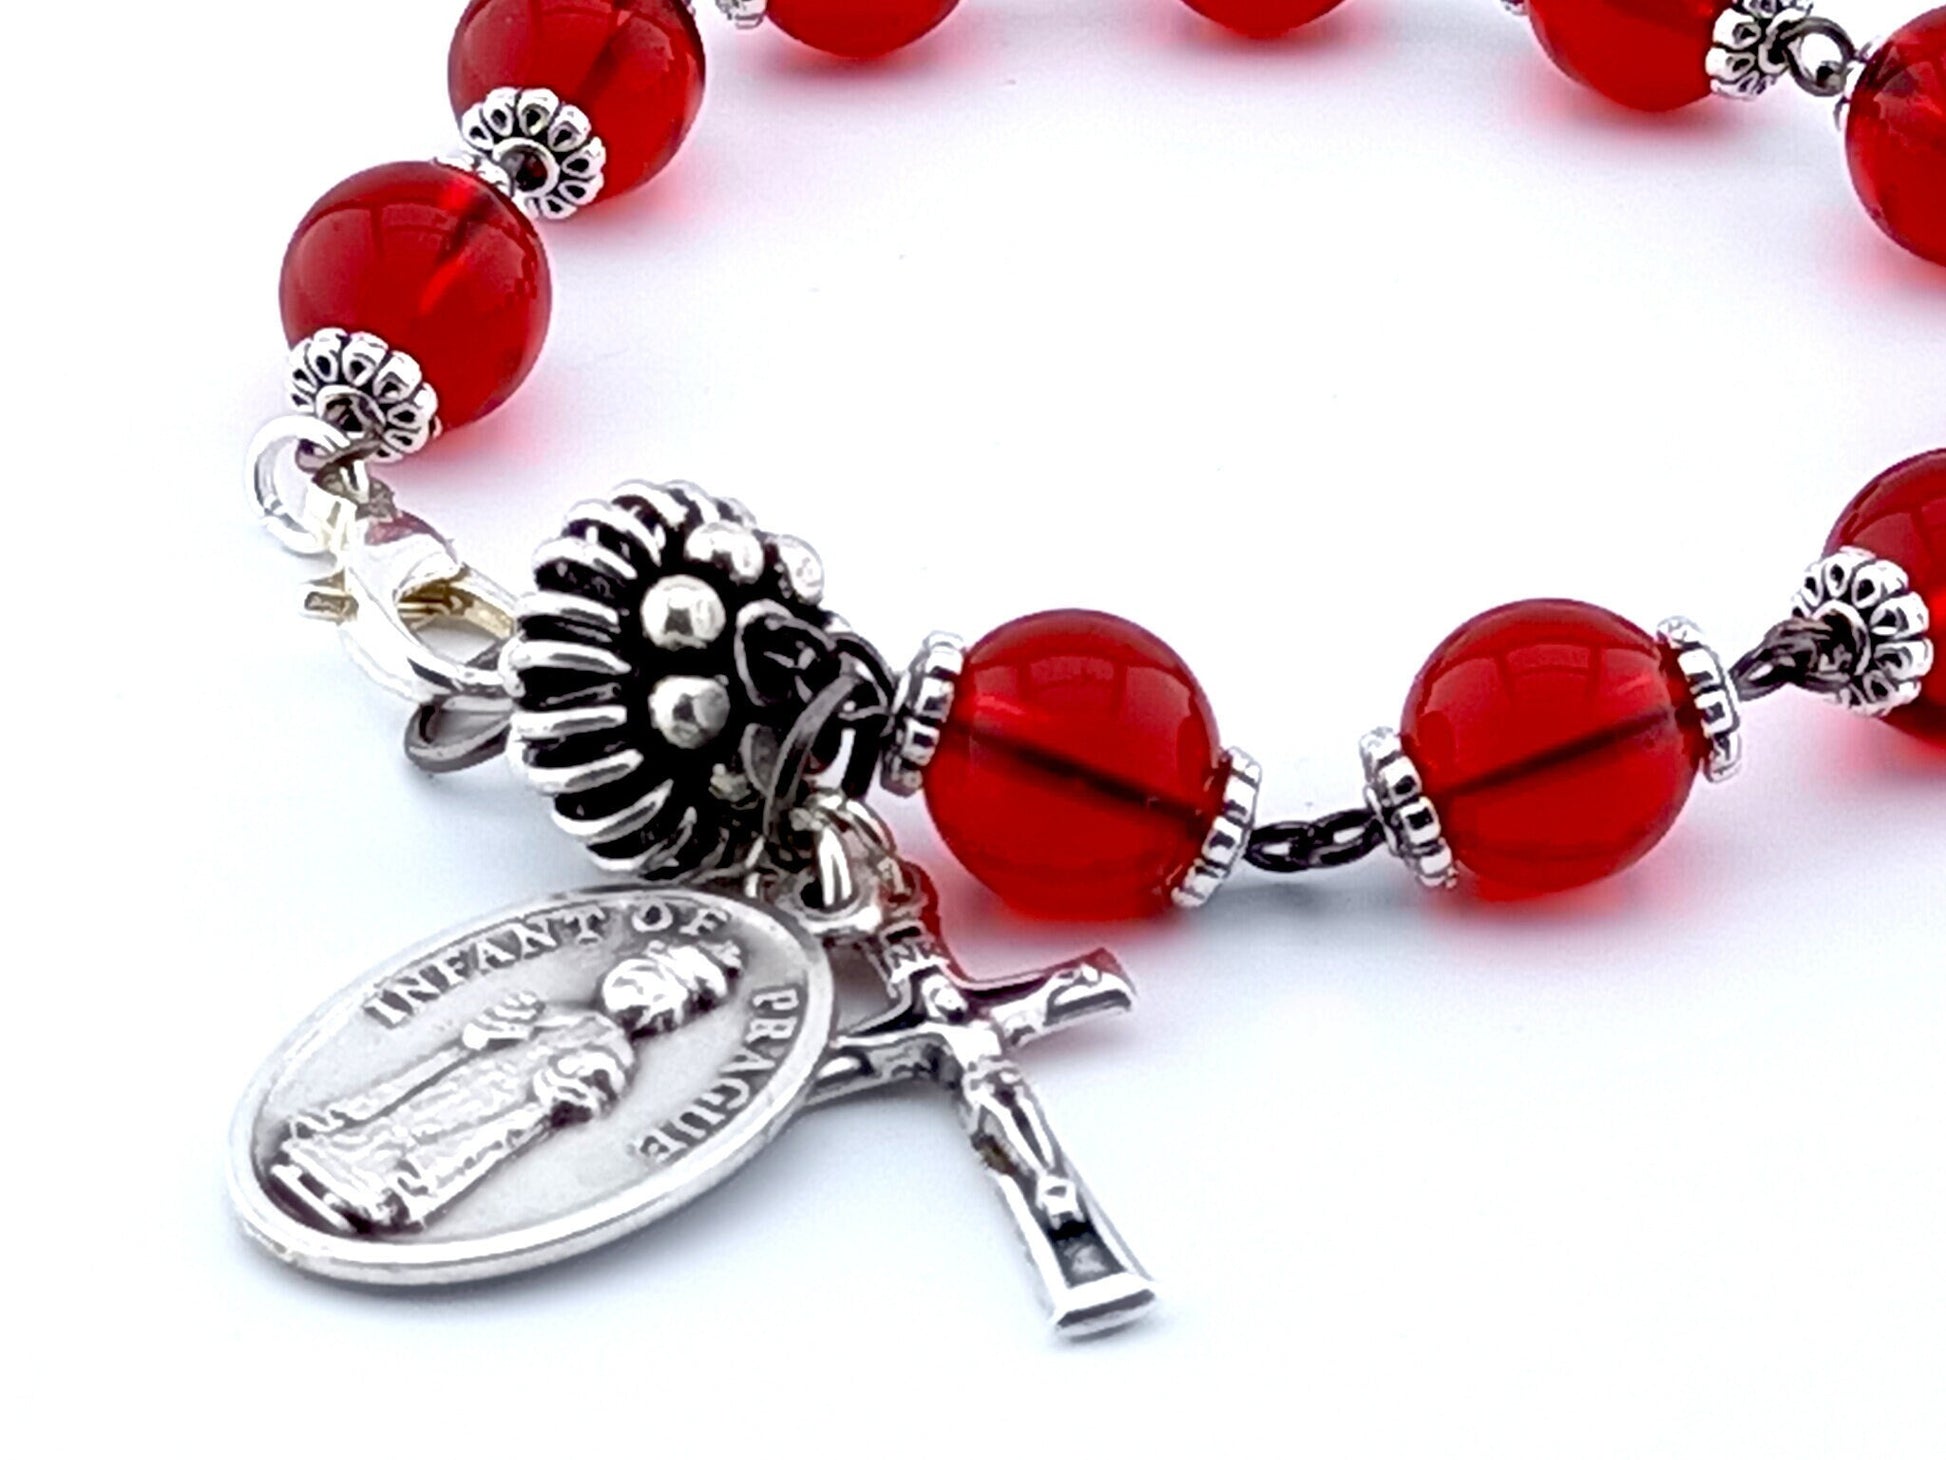 Infant of Prague unique rosary beads single decade bracelet with red glass beads, silver pater bead, crucifix and medal.